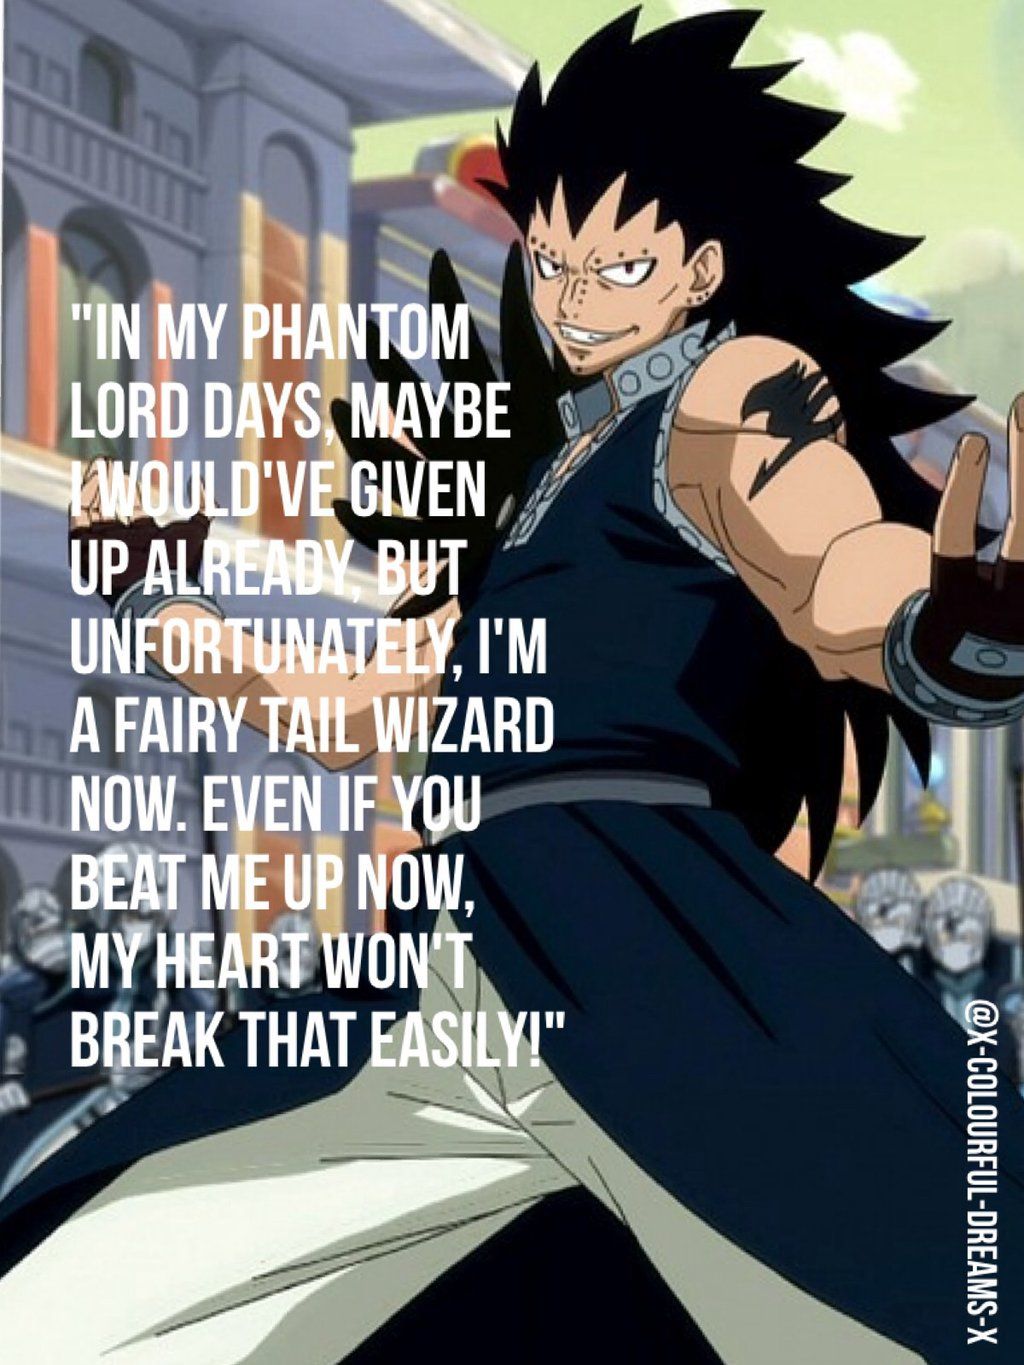 fairy tail quotes